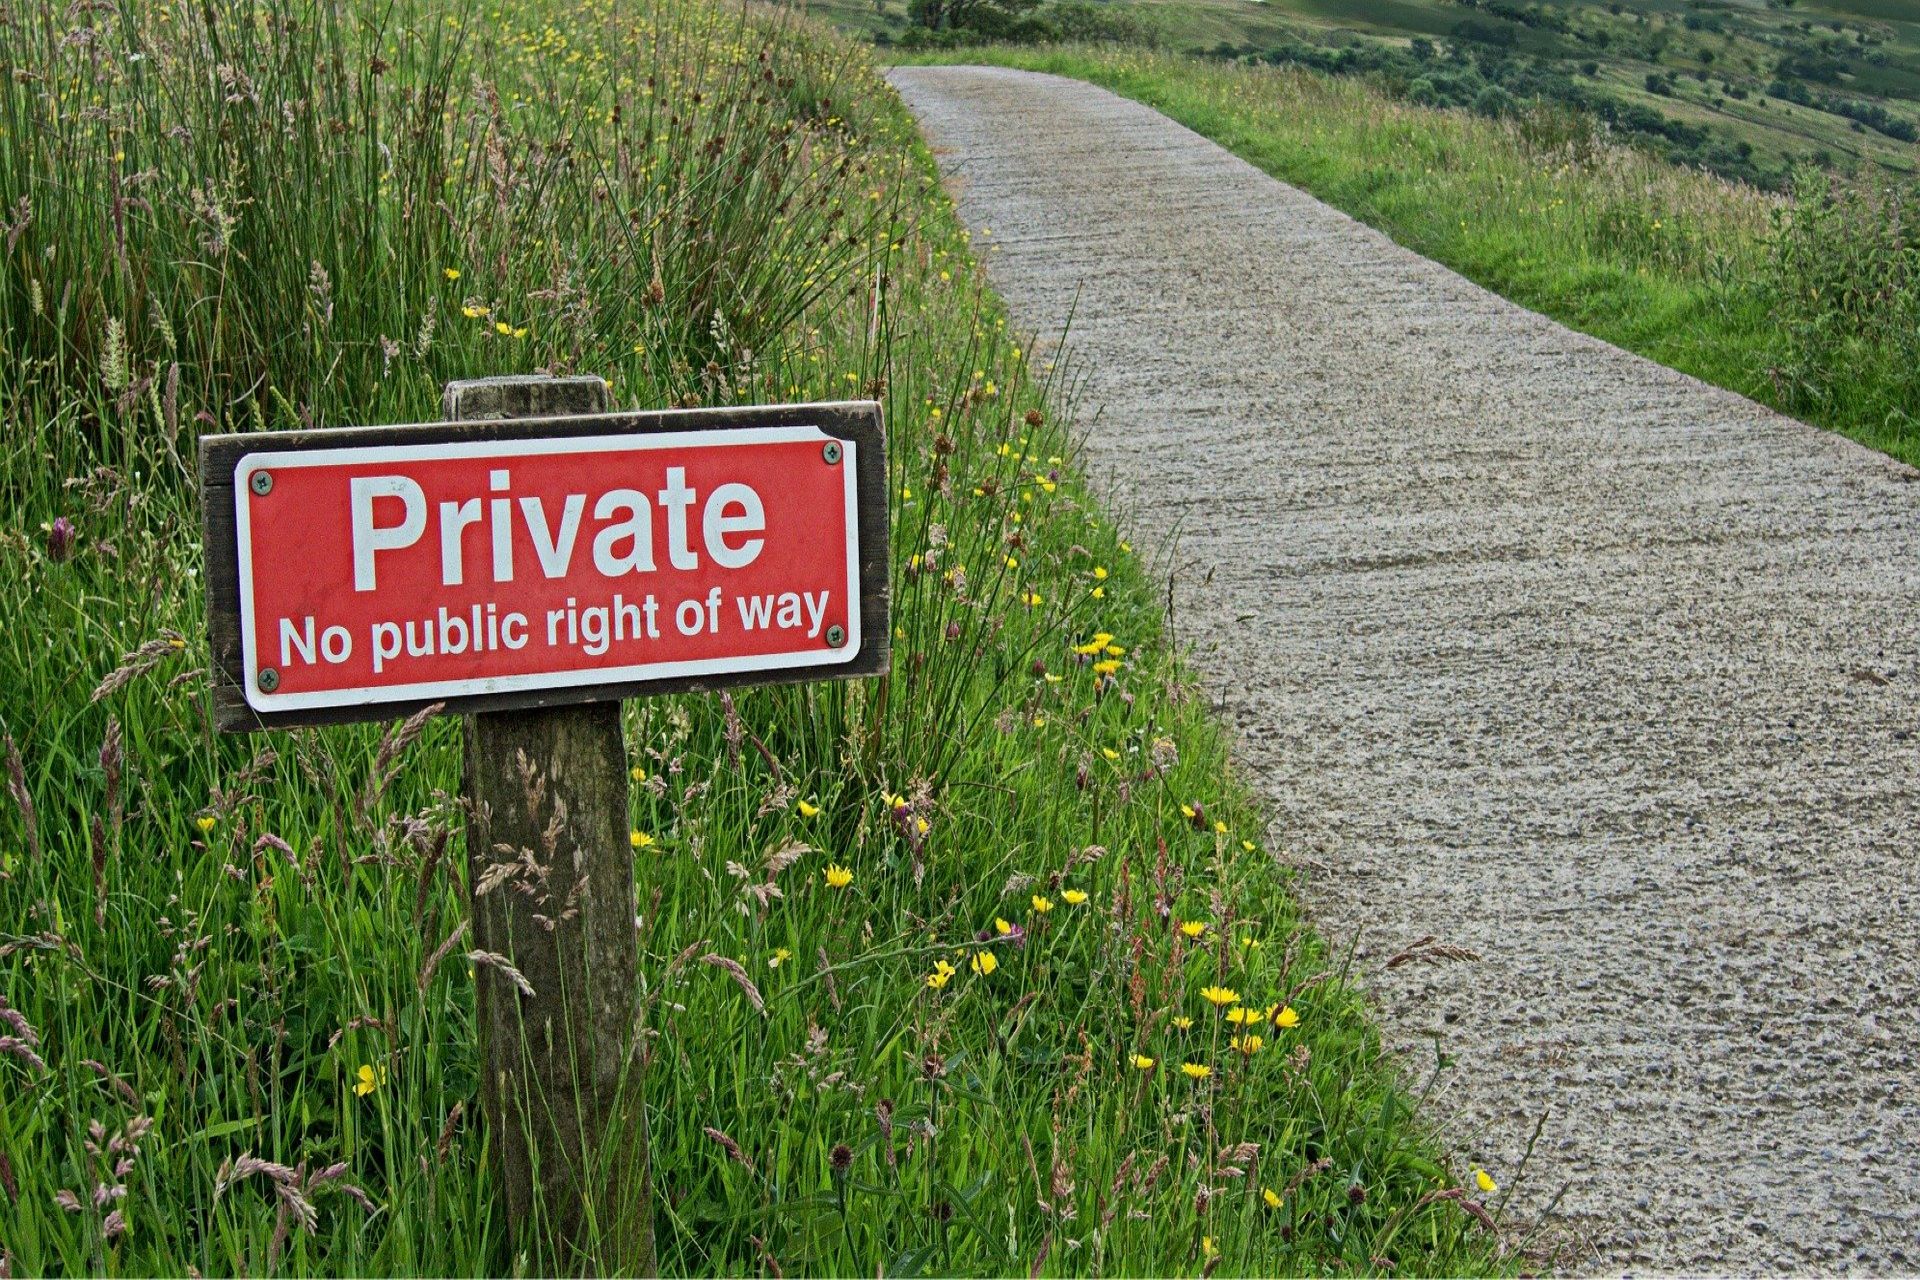 Private Road Design and Construction Standards link